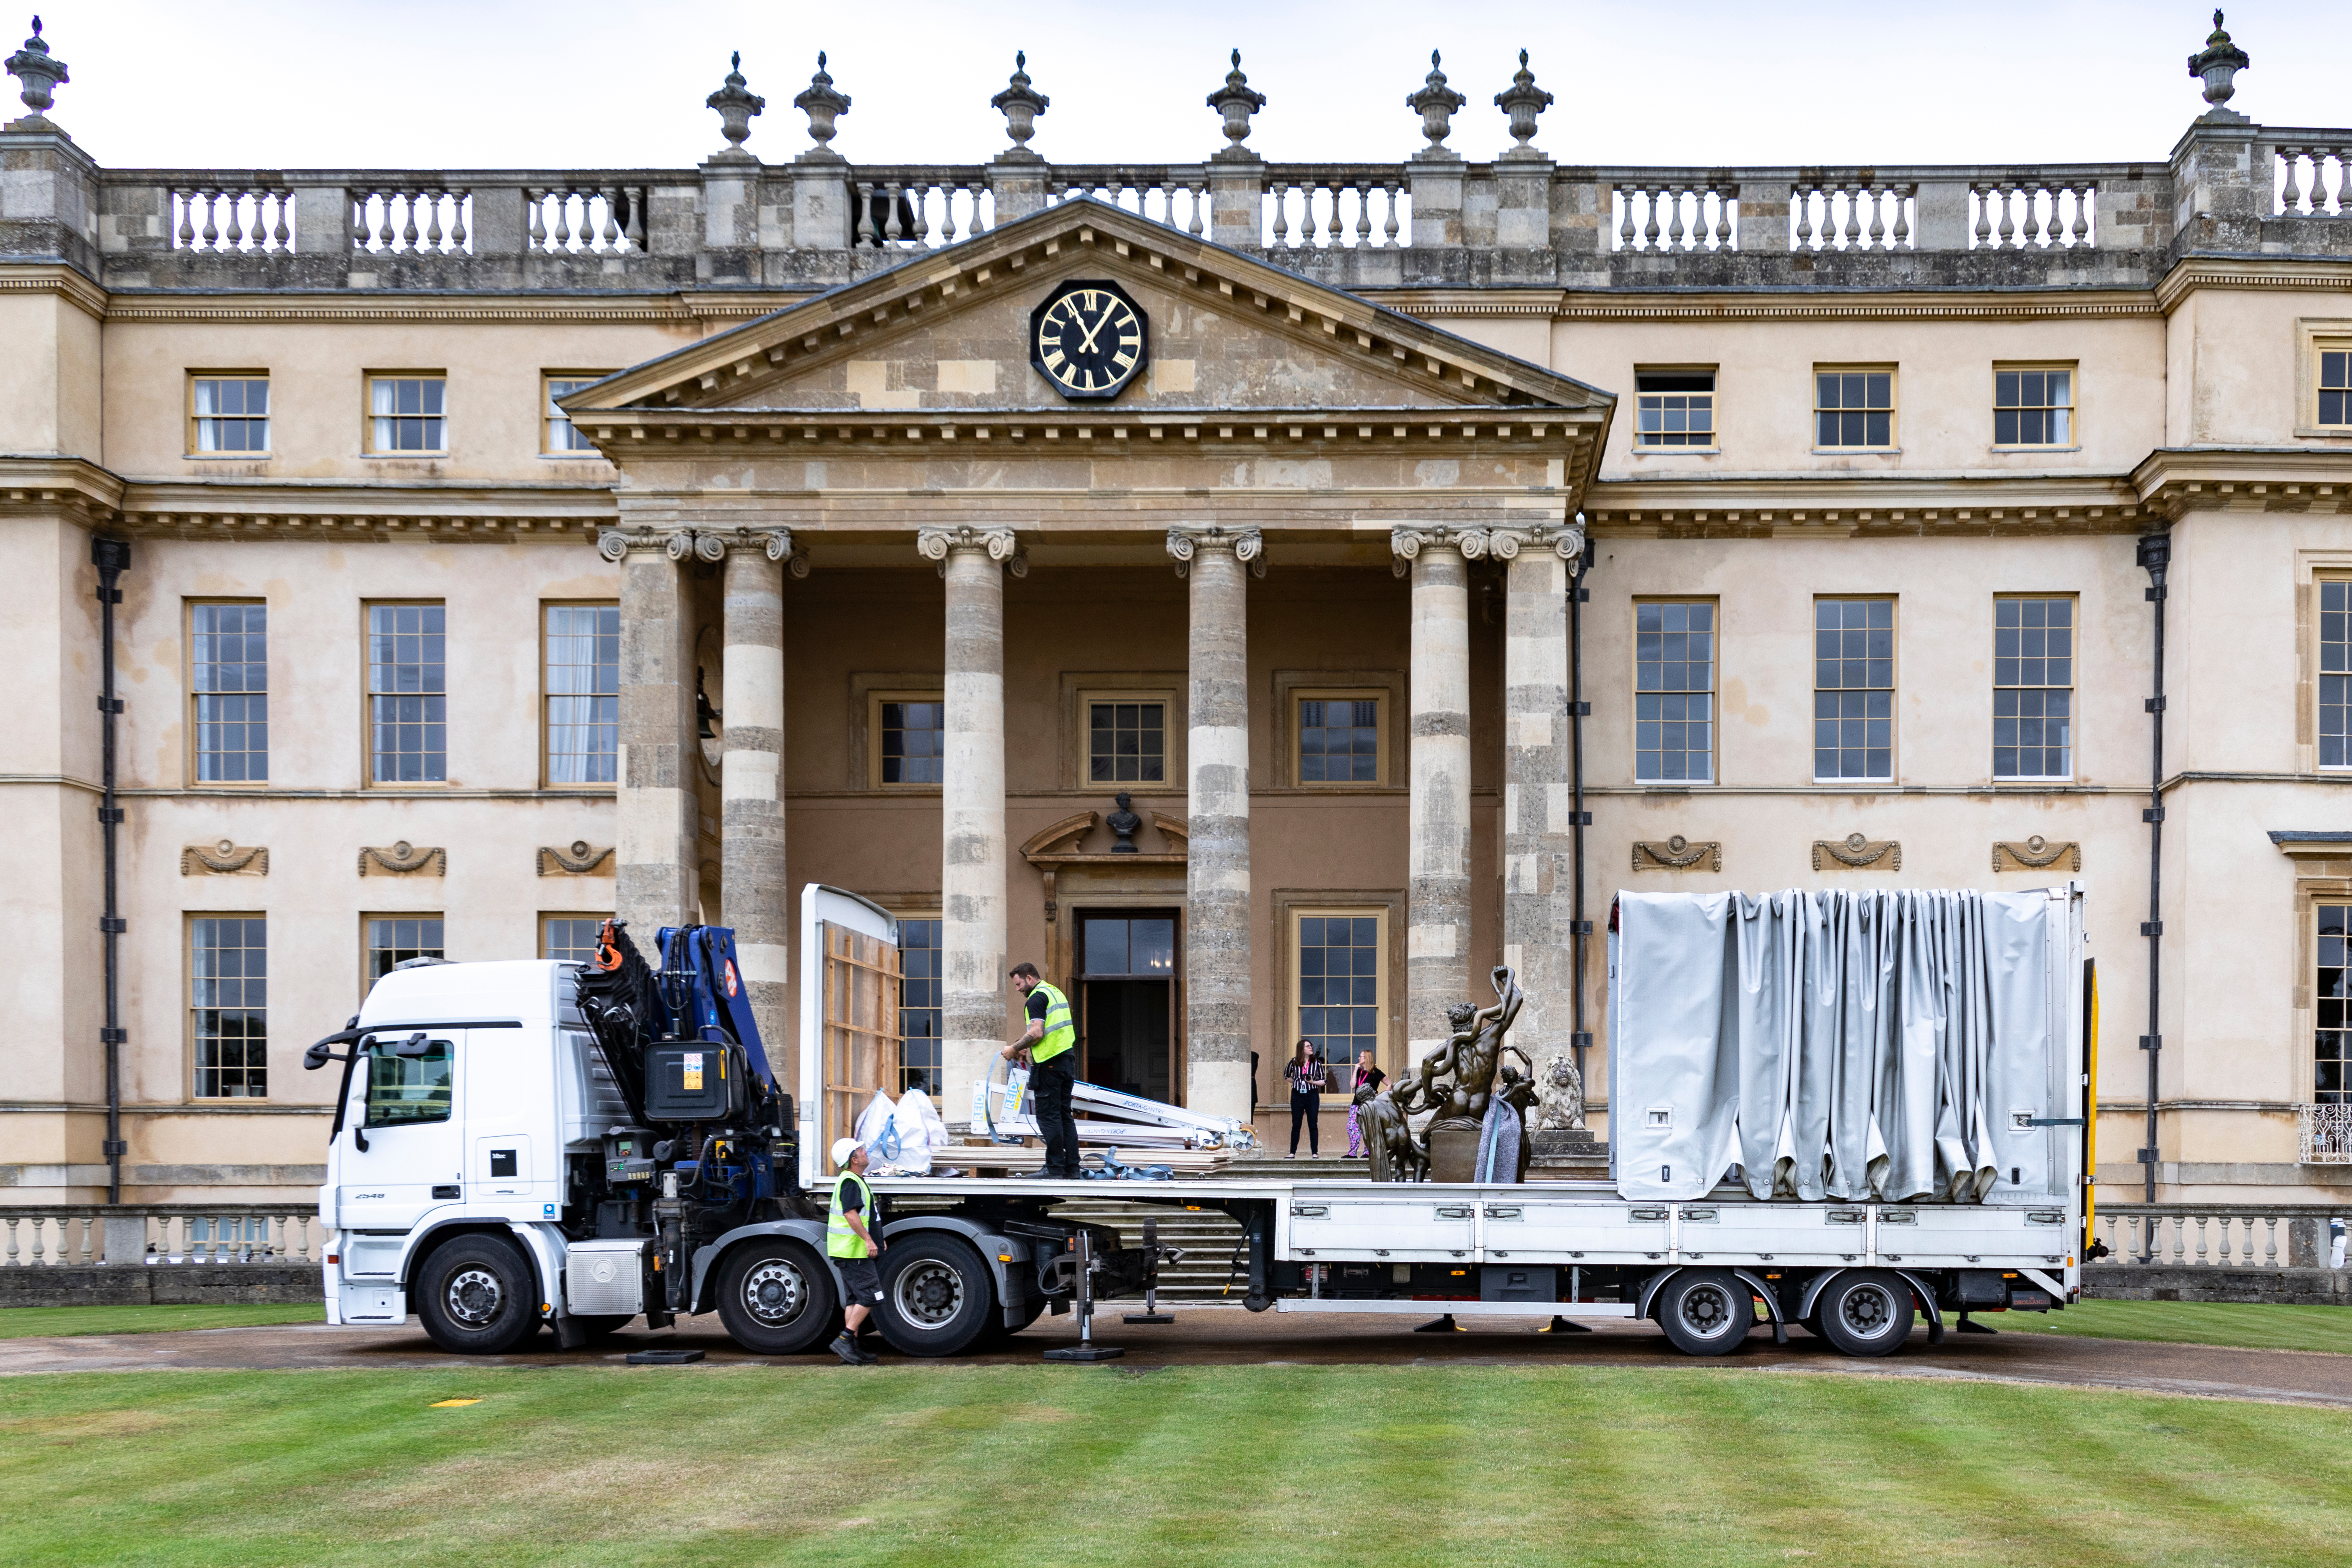 The Laocoön arriving at Stowe House. Photo by Andy Marshall.